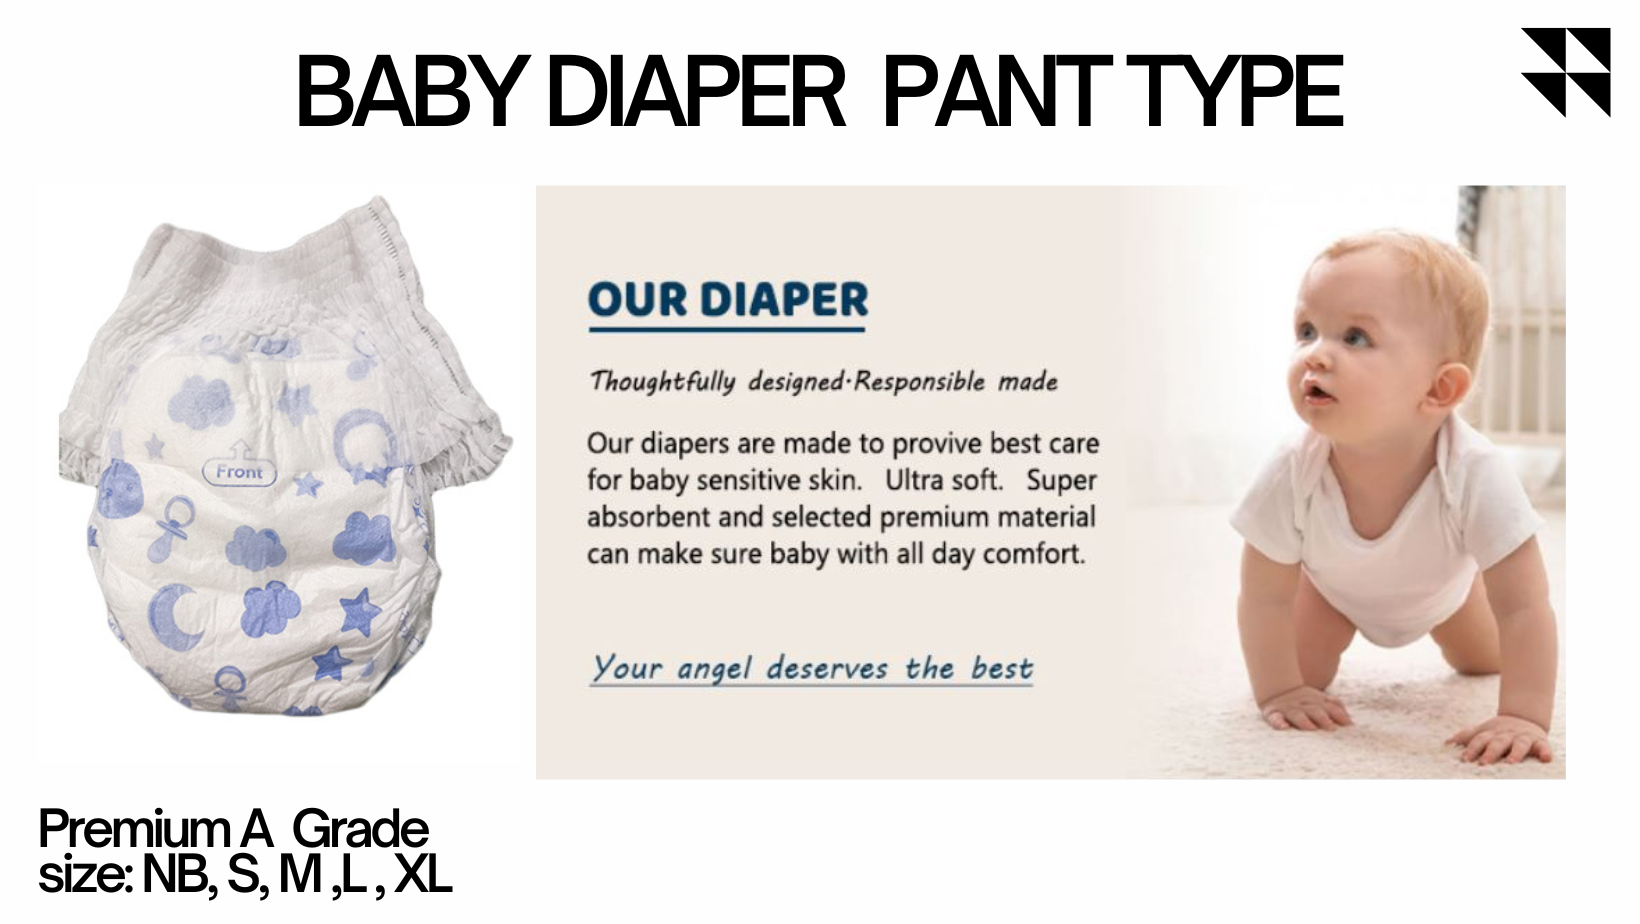 Snuggy Newborn Diapers: Buy NB Size Diapers for Your Baby